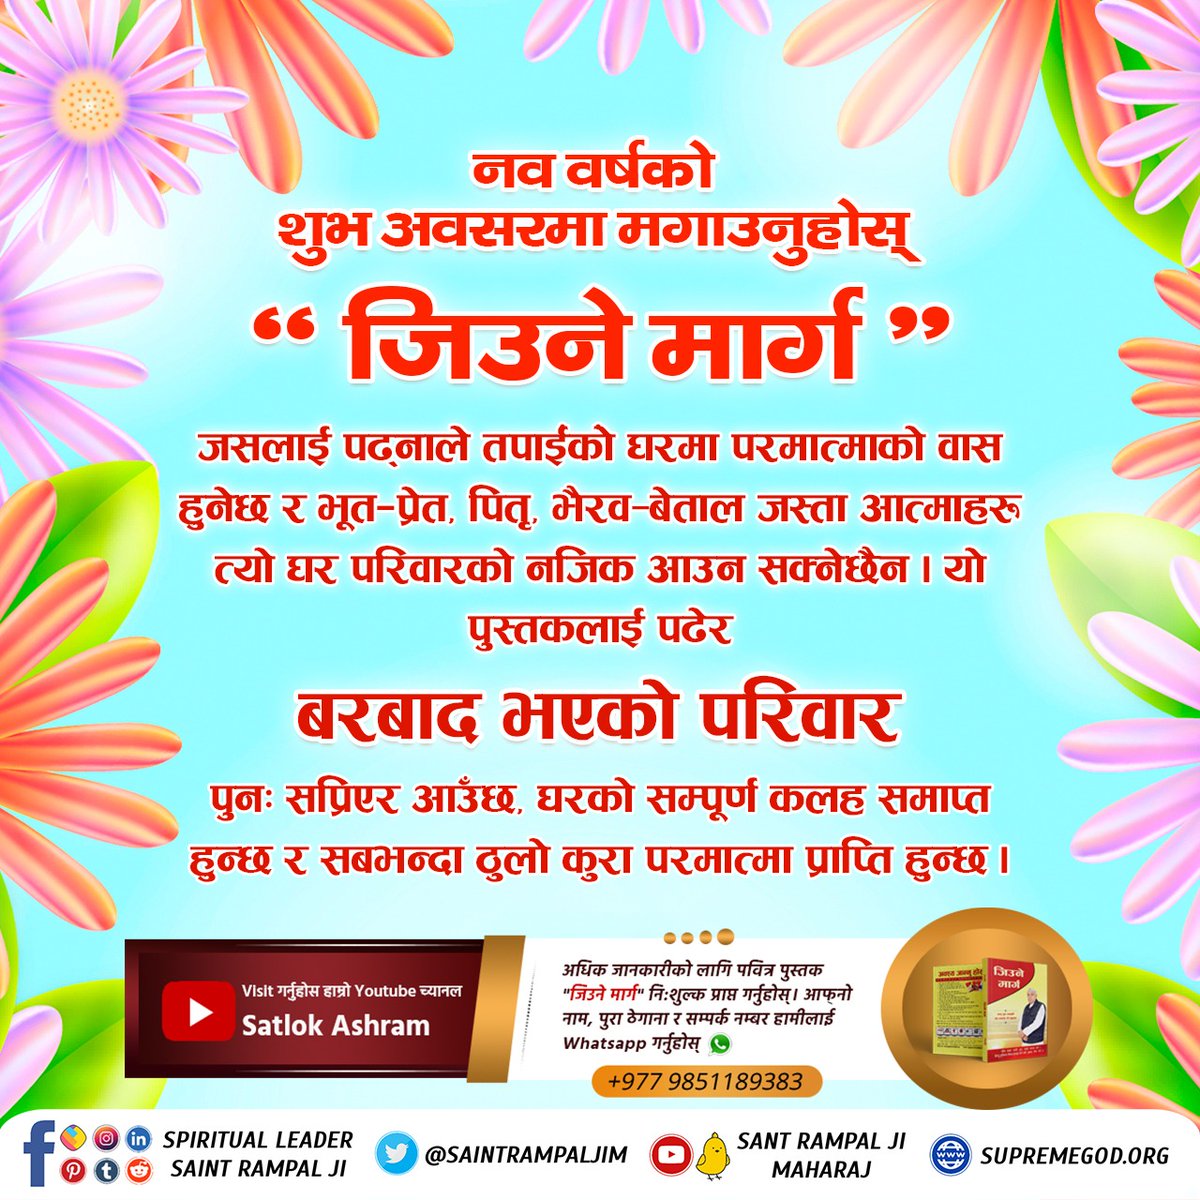 #नयाँवर्षमा_जीवनको_नयाँयात्रा 'Jiune Marg' is a precious book which brings out happiness in life. On this New Year occasion, you can invite me to your home for free. Must listen to the nectar words of Saint Rampal Ji Maharaj on TV Today, Watch from 2:00 PM #GodMorningMonday